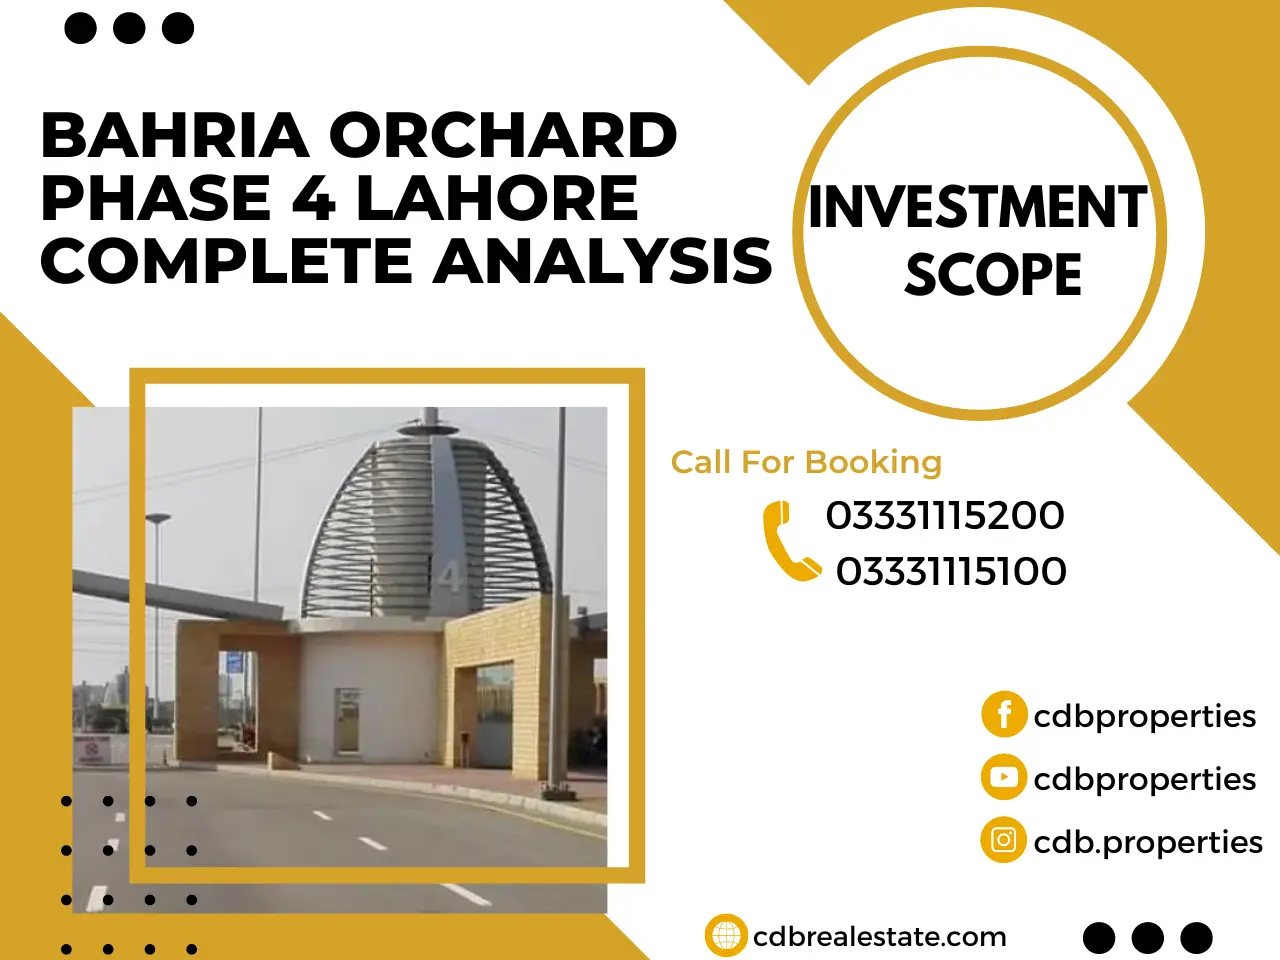 Bahria Orchard Phase 4 Investment Scope